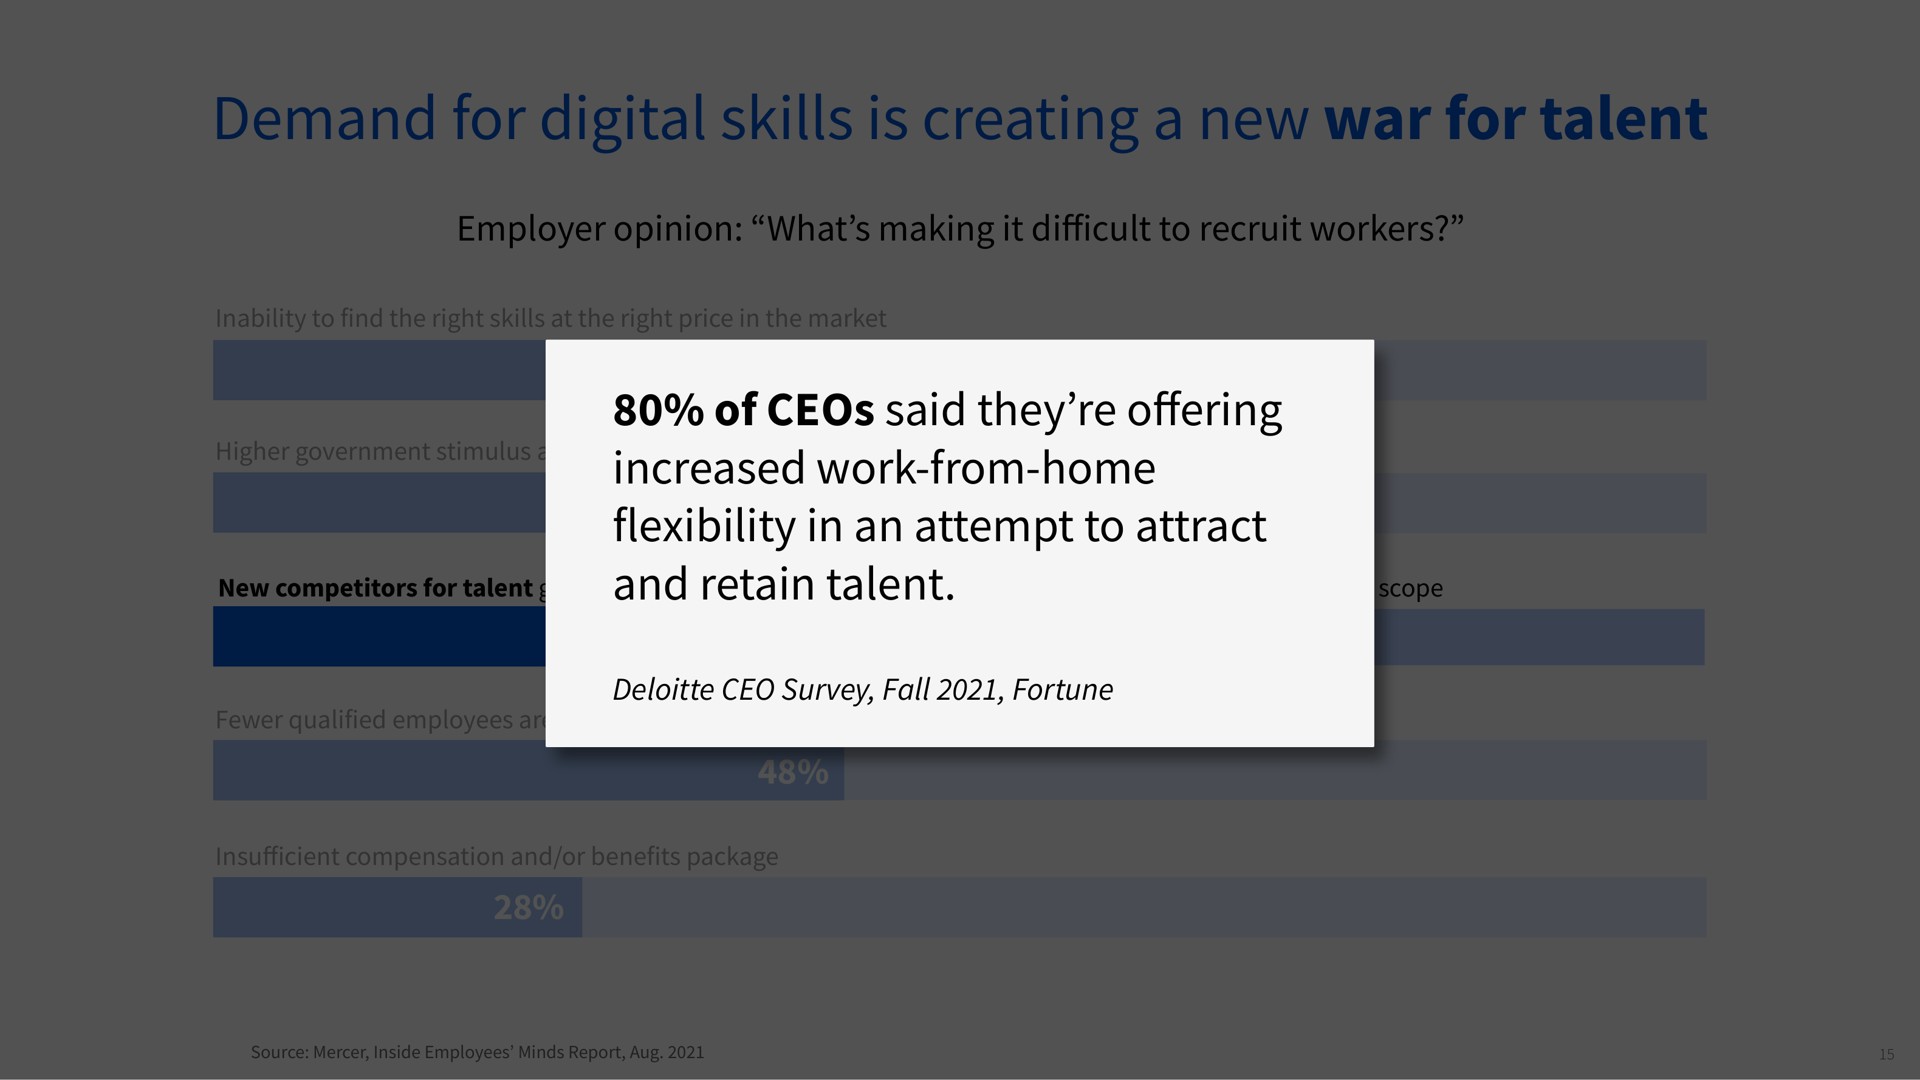 demand for digital skills is creating a new war for talent employer opinion what making it to recruit workers inability to find the right skills at the right price in the market higher government stimulus and unemployment benefits of said they increased work from home flexibility in an attempt to attract and retain talent new competitors for talent given flexible working practices of companies outside of normal geographic scope new competitors for talent given flexible working practices of companies outside of normal geographic scope qualified employees are available to hire survey fall fortune compensation and or benefits package | Coursera